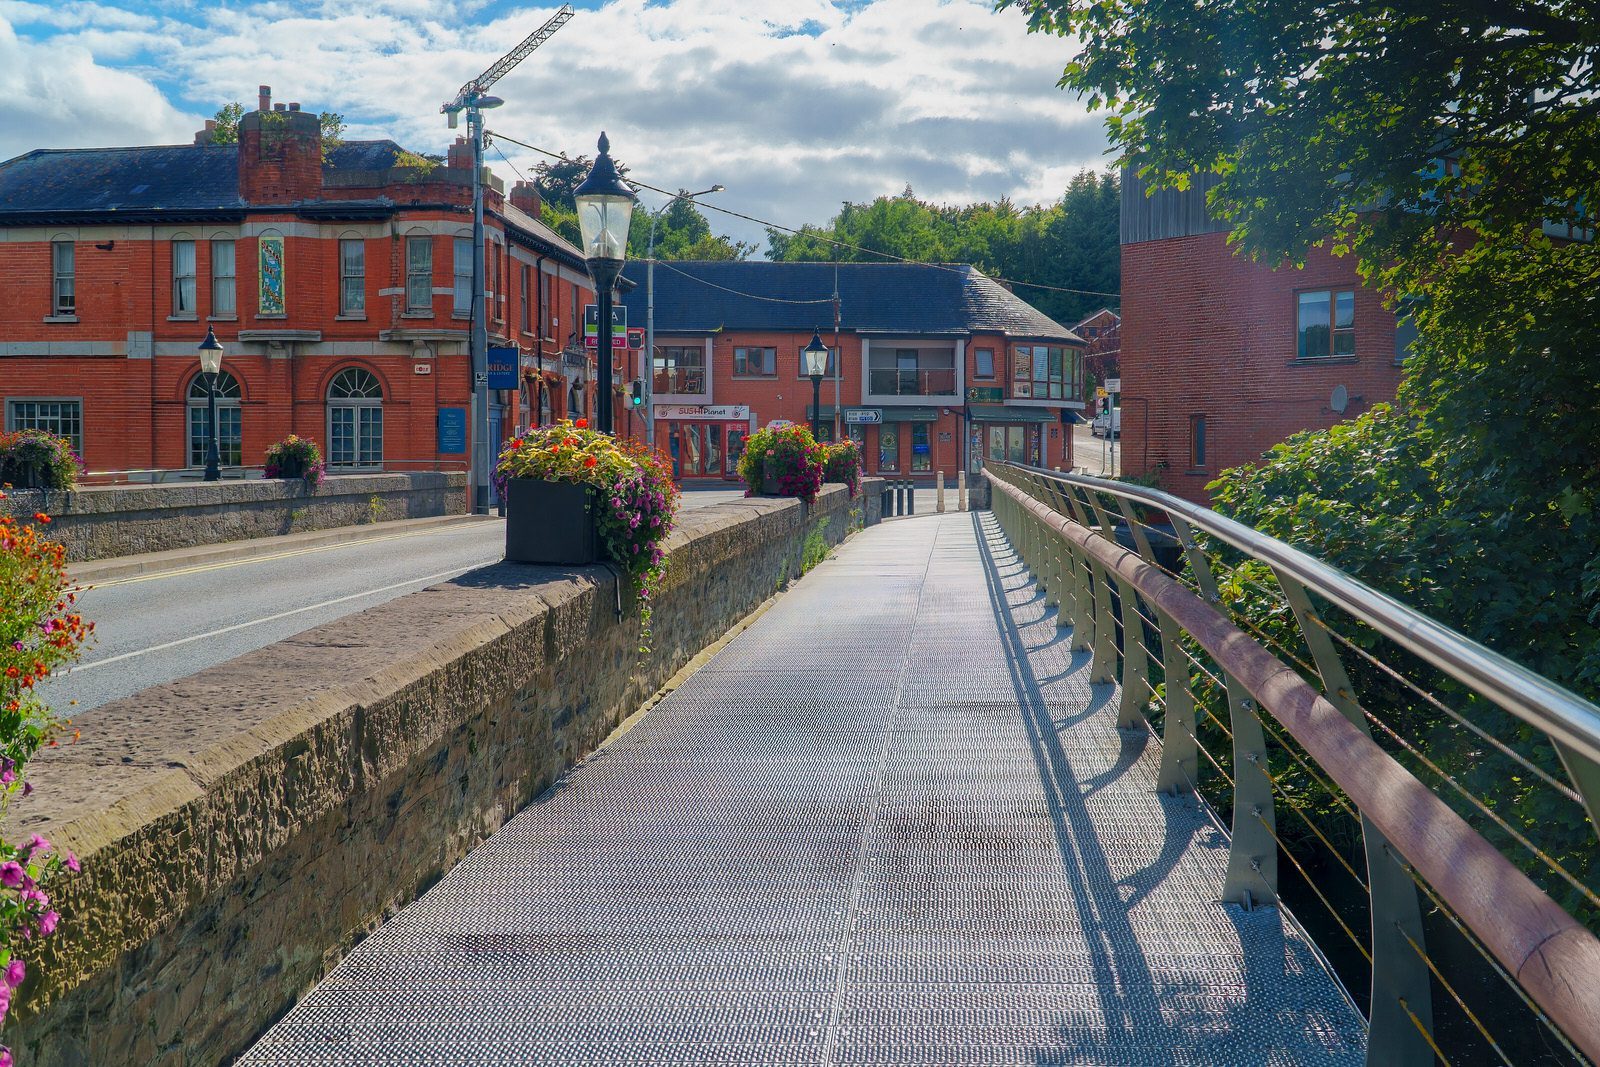 THE ANNA LIVIA BRIDGE IN CHAPELIZOD [IT WAS BUILT IN THE 1660s AND NAMED THE CHAPELIZOD BRIDGE] 017